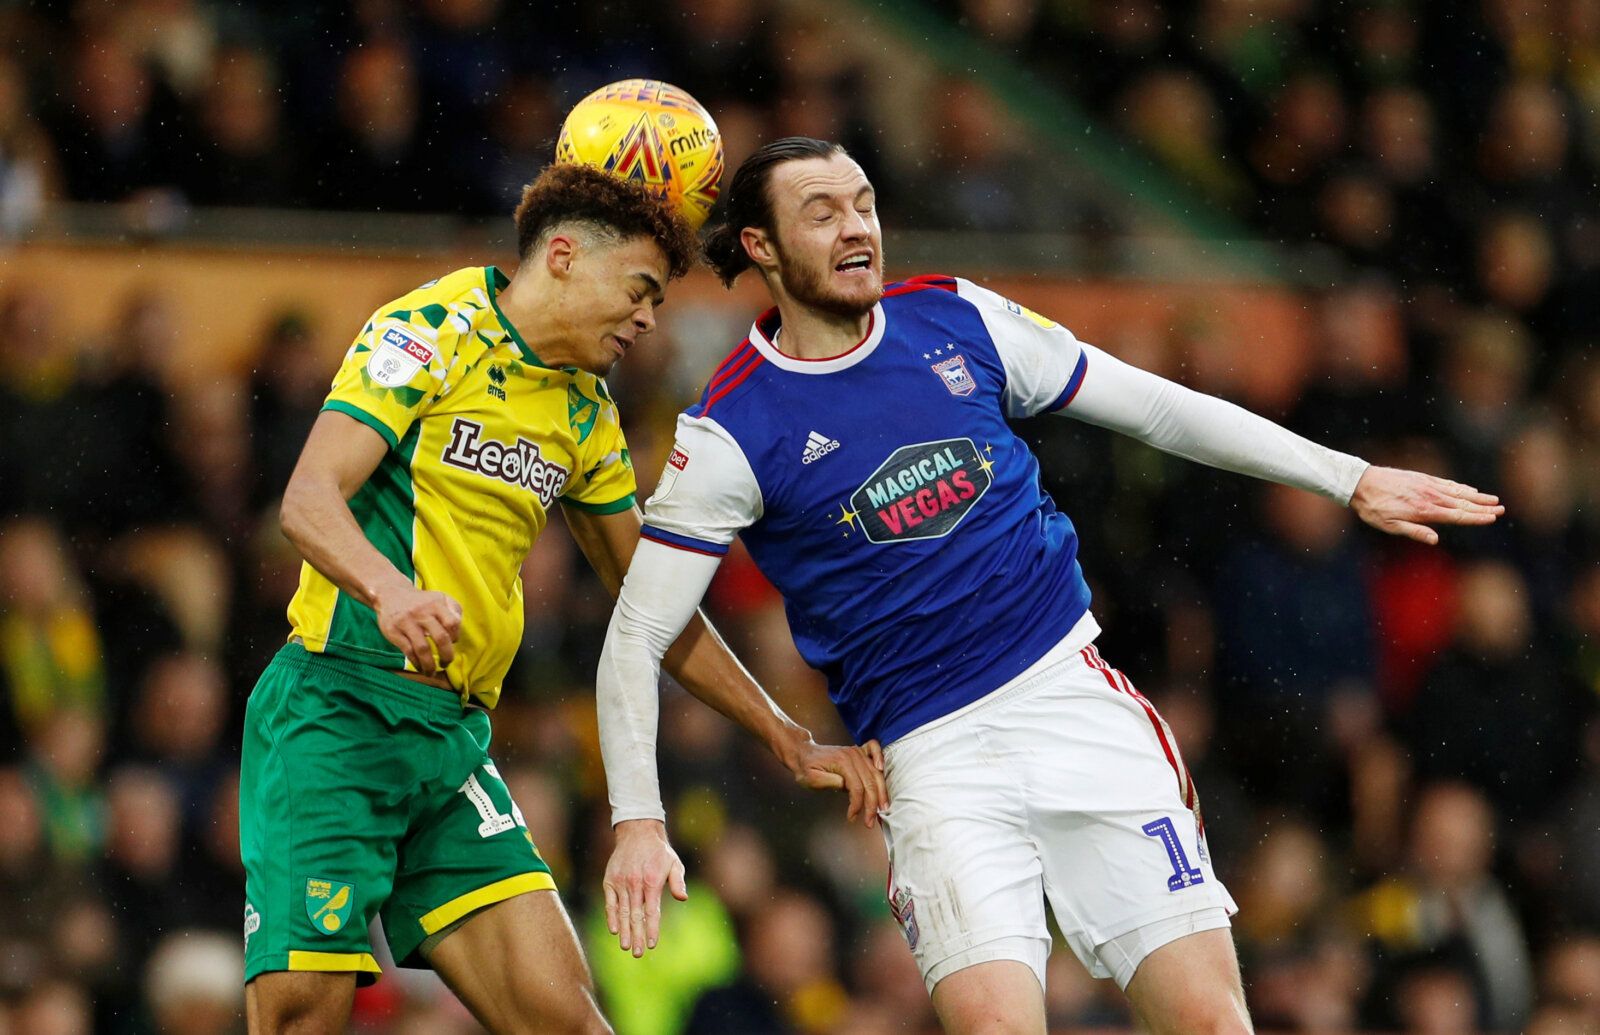 Soccer Football - Championship - Norwich City v Ipswich Town - Carrow Road, Norwich, Britain - February 10, 2019  Norwich City's Jamal Lewis in action with Ipswich Town's William Keane   Action Images/John Sibley  EDITORIAL USE ONLY. No use with unauthorized audio, video, data, fixture lists, club/league logos or 